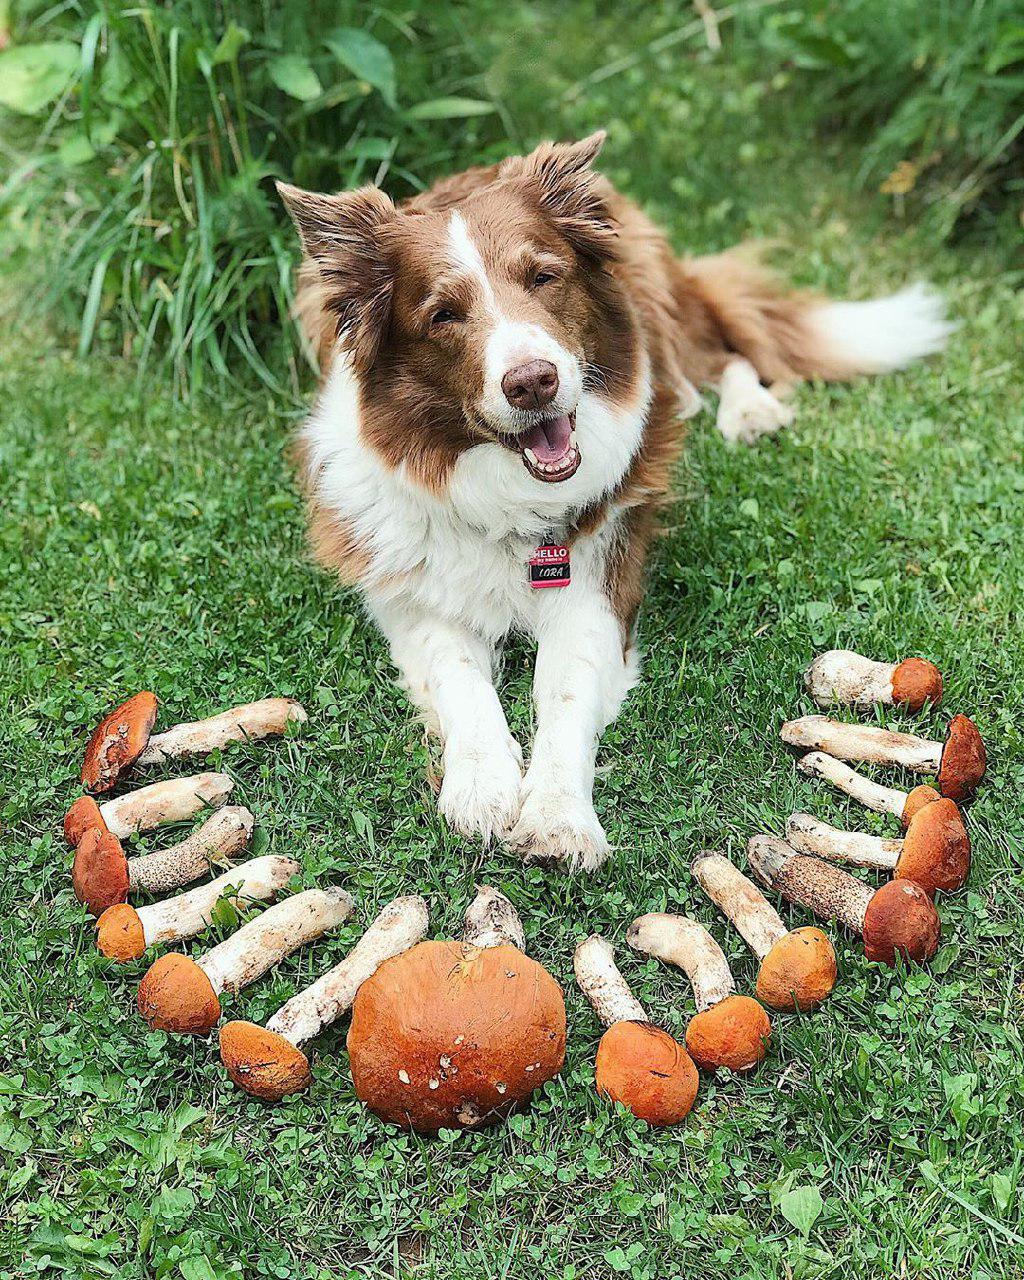 a happy Border Collie lying down in front of the collected mushrooms on the green grass in the garden